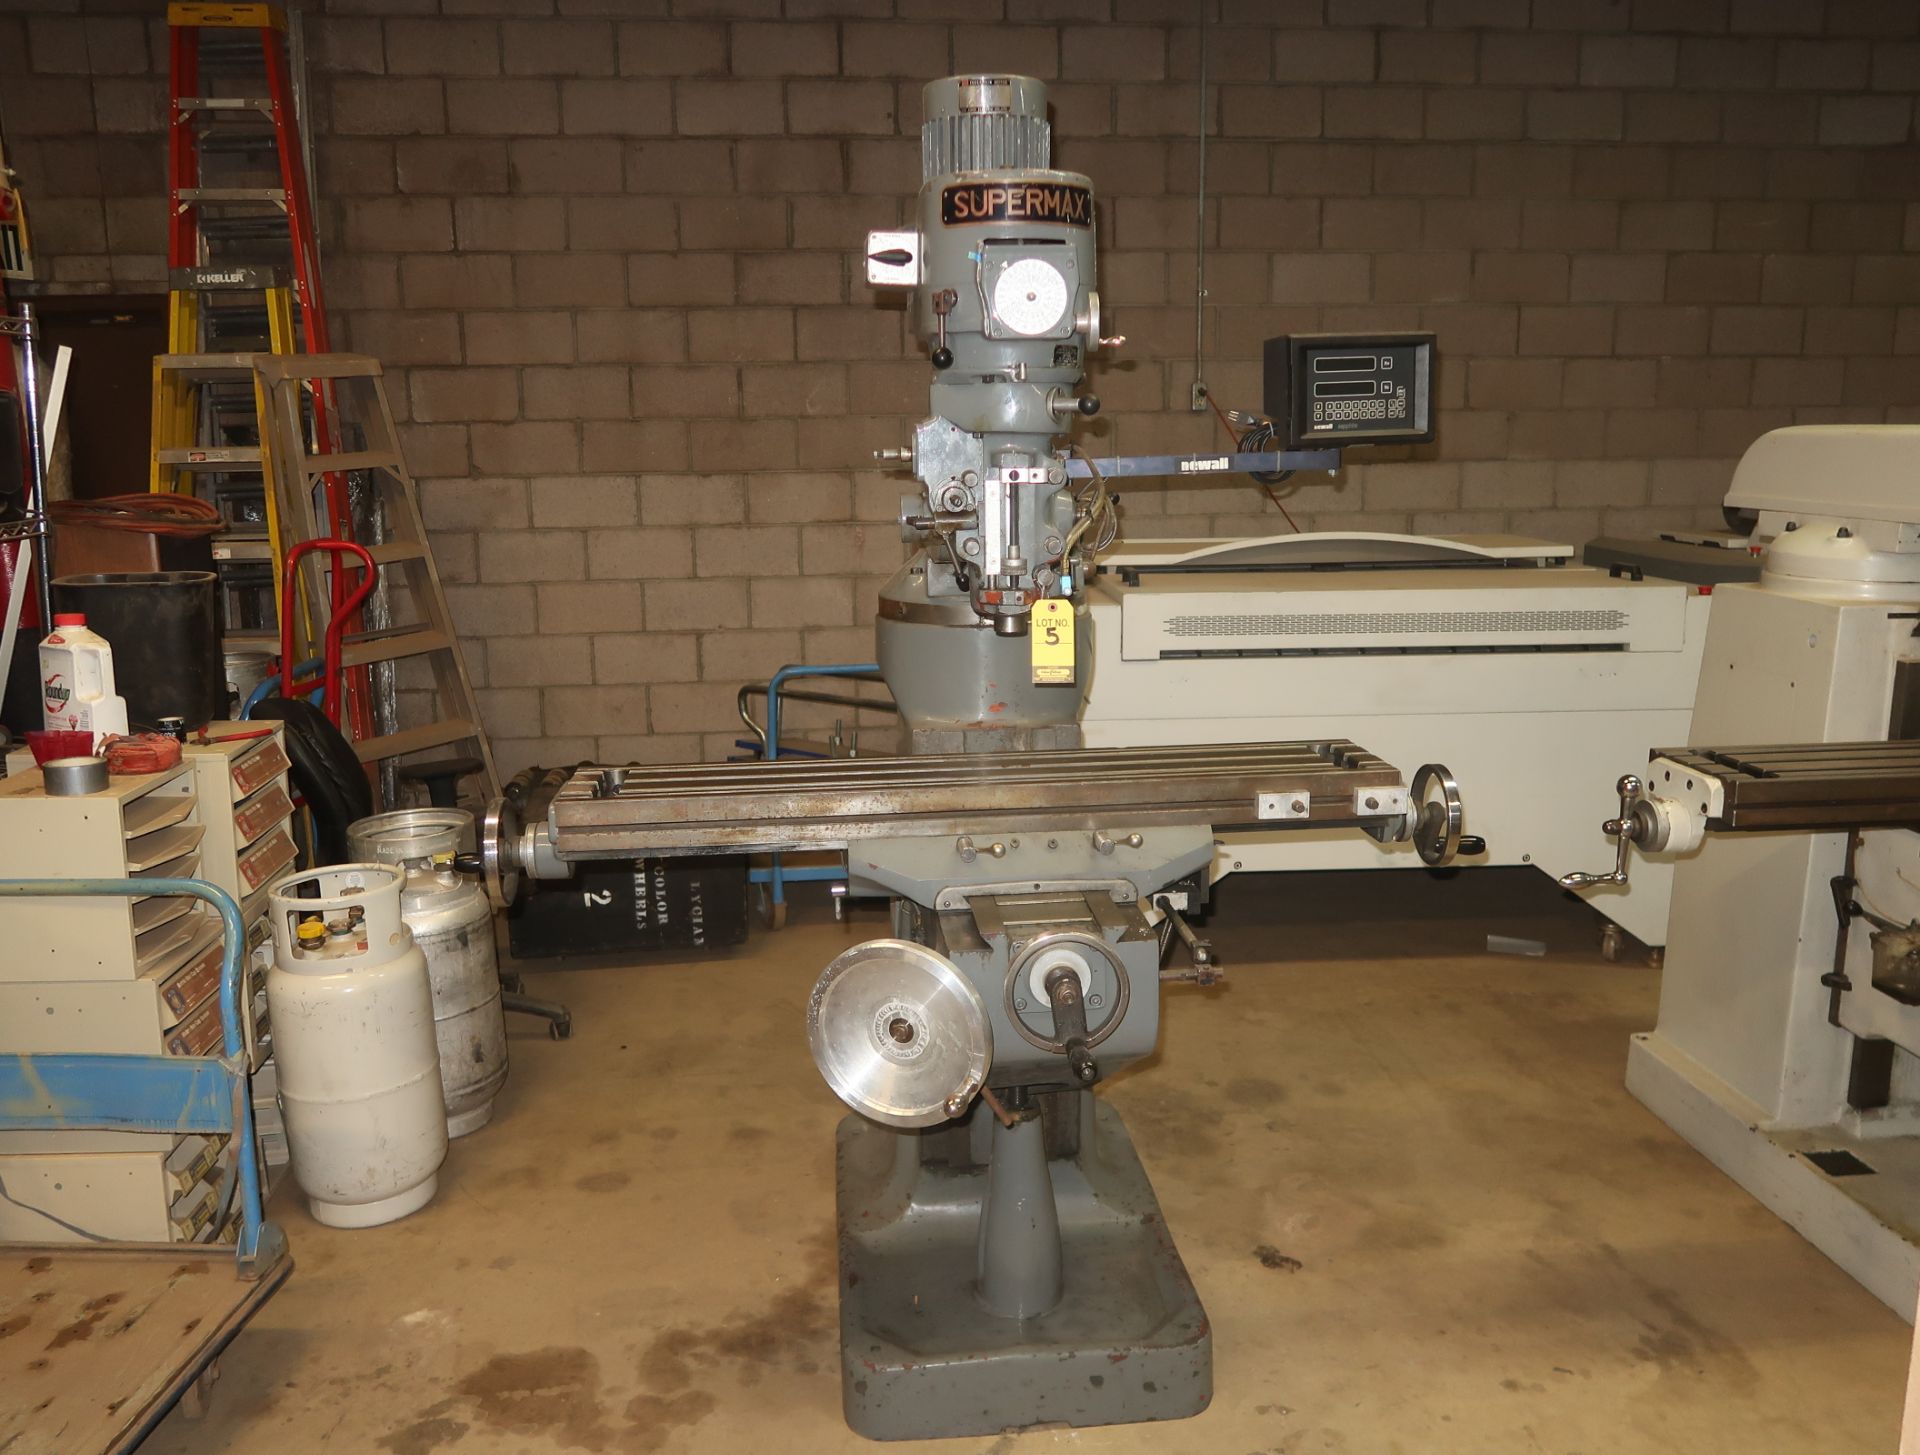 SUPERMAX MDL. YC 1 1/2 VS VERTICAL MILL, 48" X 9" TABLE, VARIABLE SPEED, GEAR HEAD, NEWALL 2-AXIS - Image 2 of 5